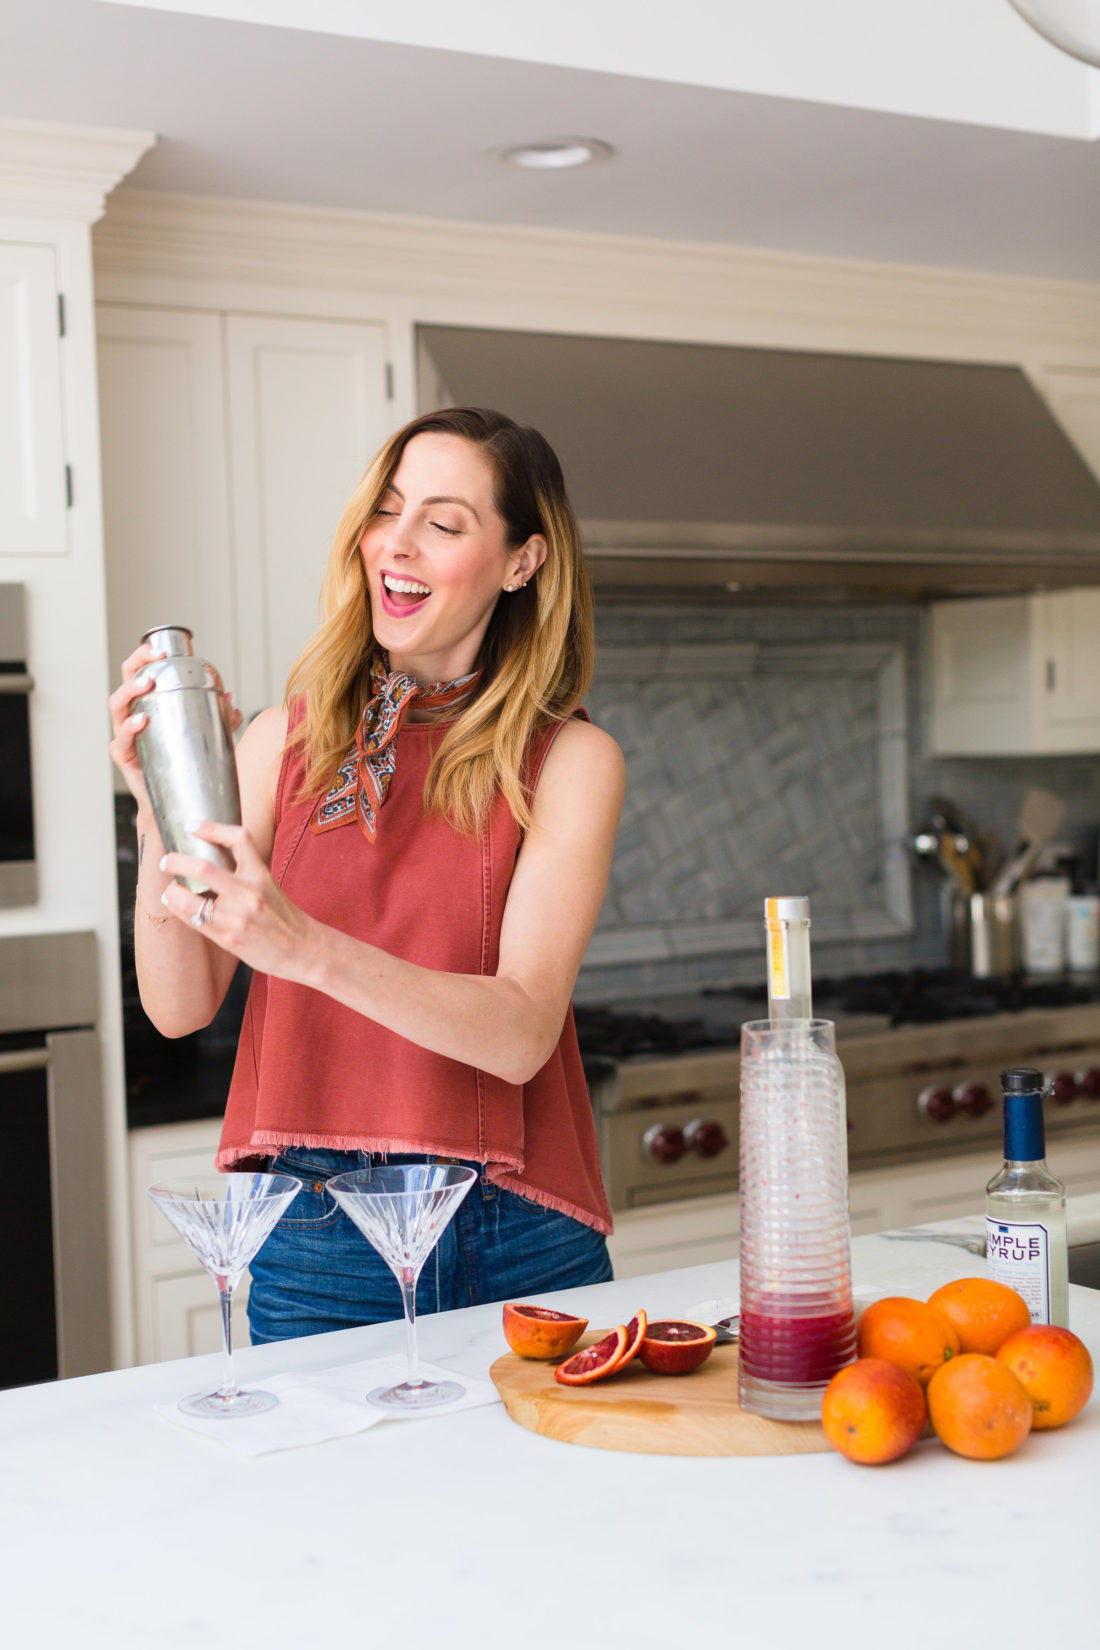 Eva Amurri Martino shakes up her blood orange and ginger martinis in a stainless steel cocktail shaker in the kitchen of her Connecticut home